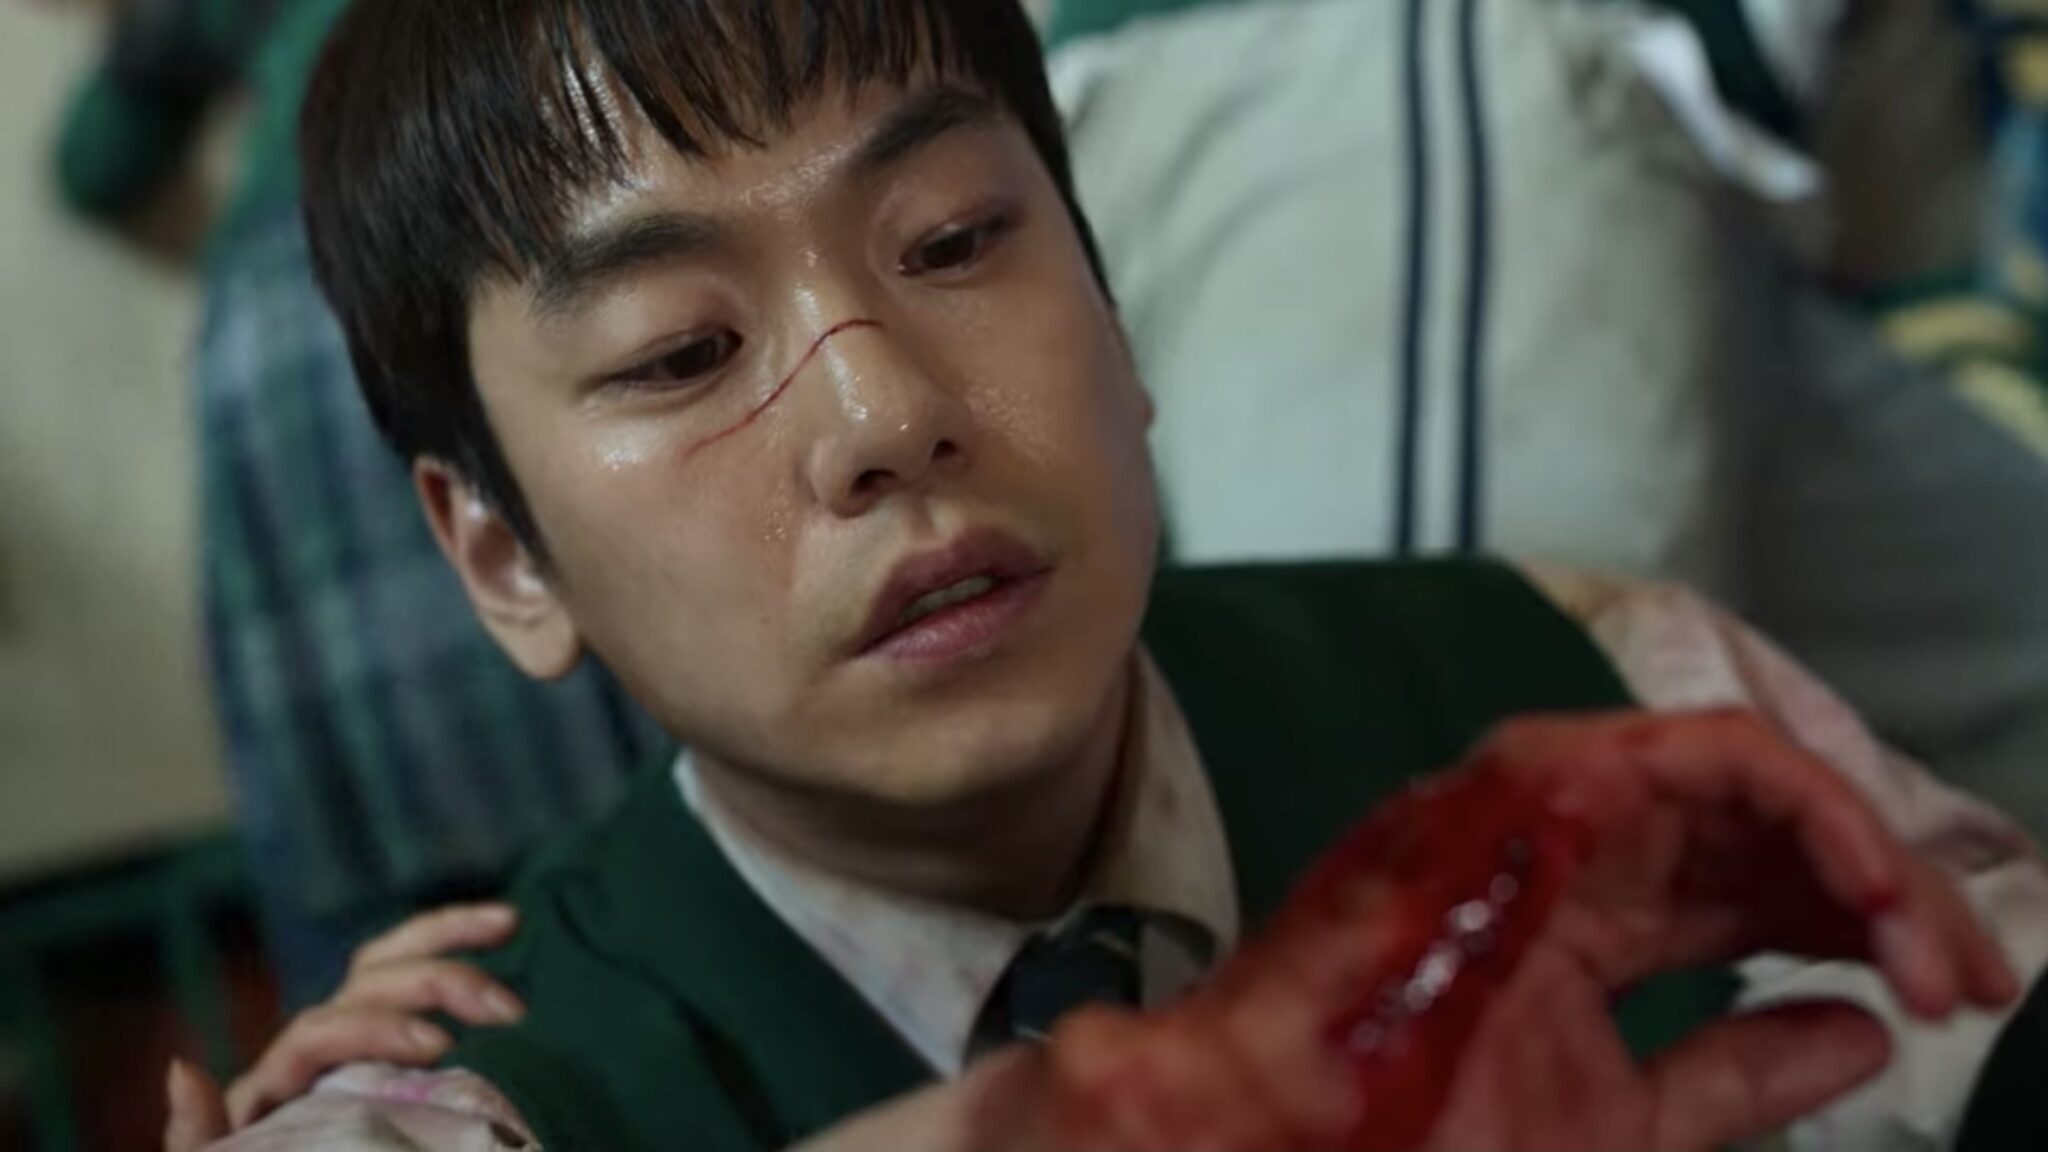 All of Us Are Dead: Episodes 2-12 (Series review) » Dramabeans